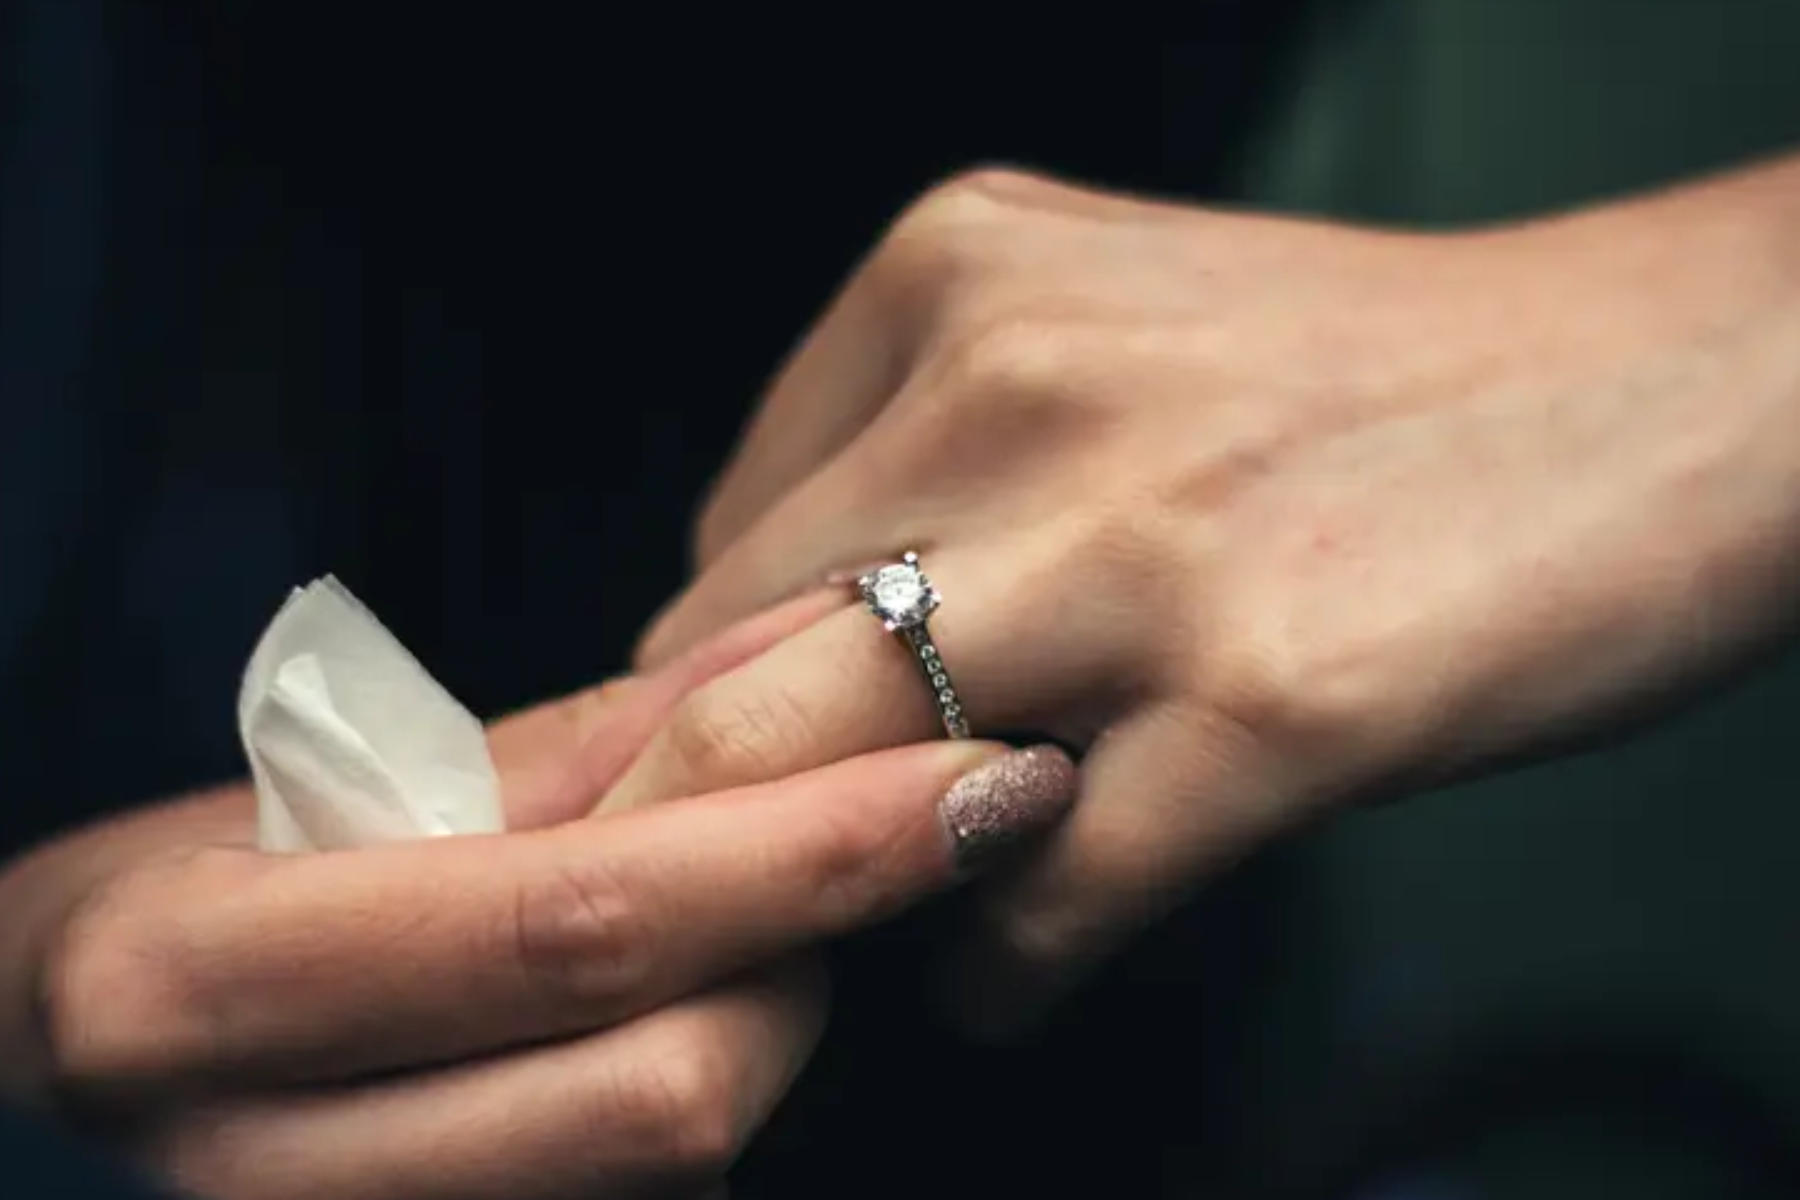 A woman is about to take off her ring finger's fake antique ring